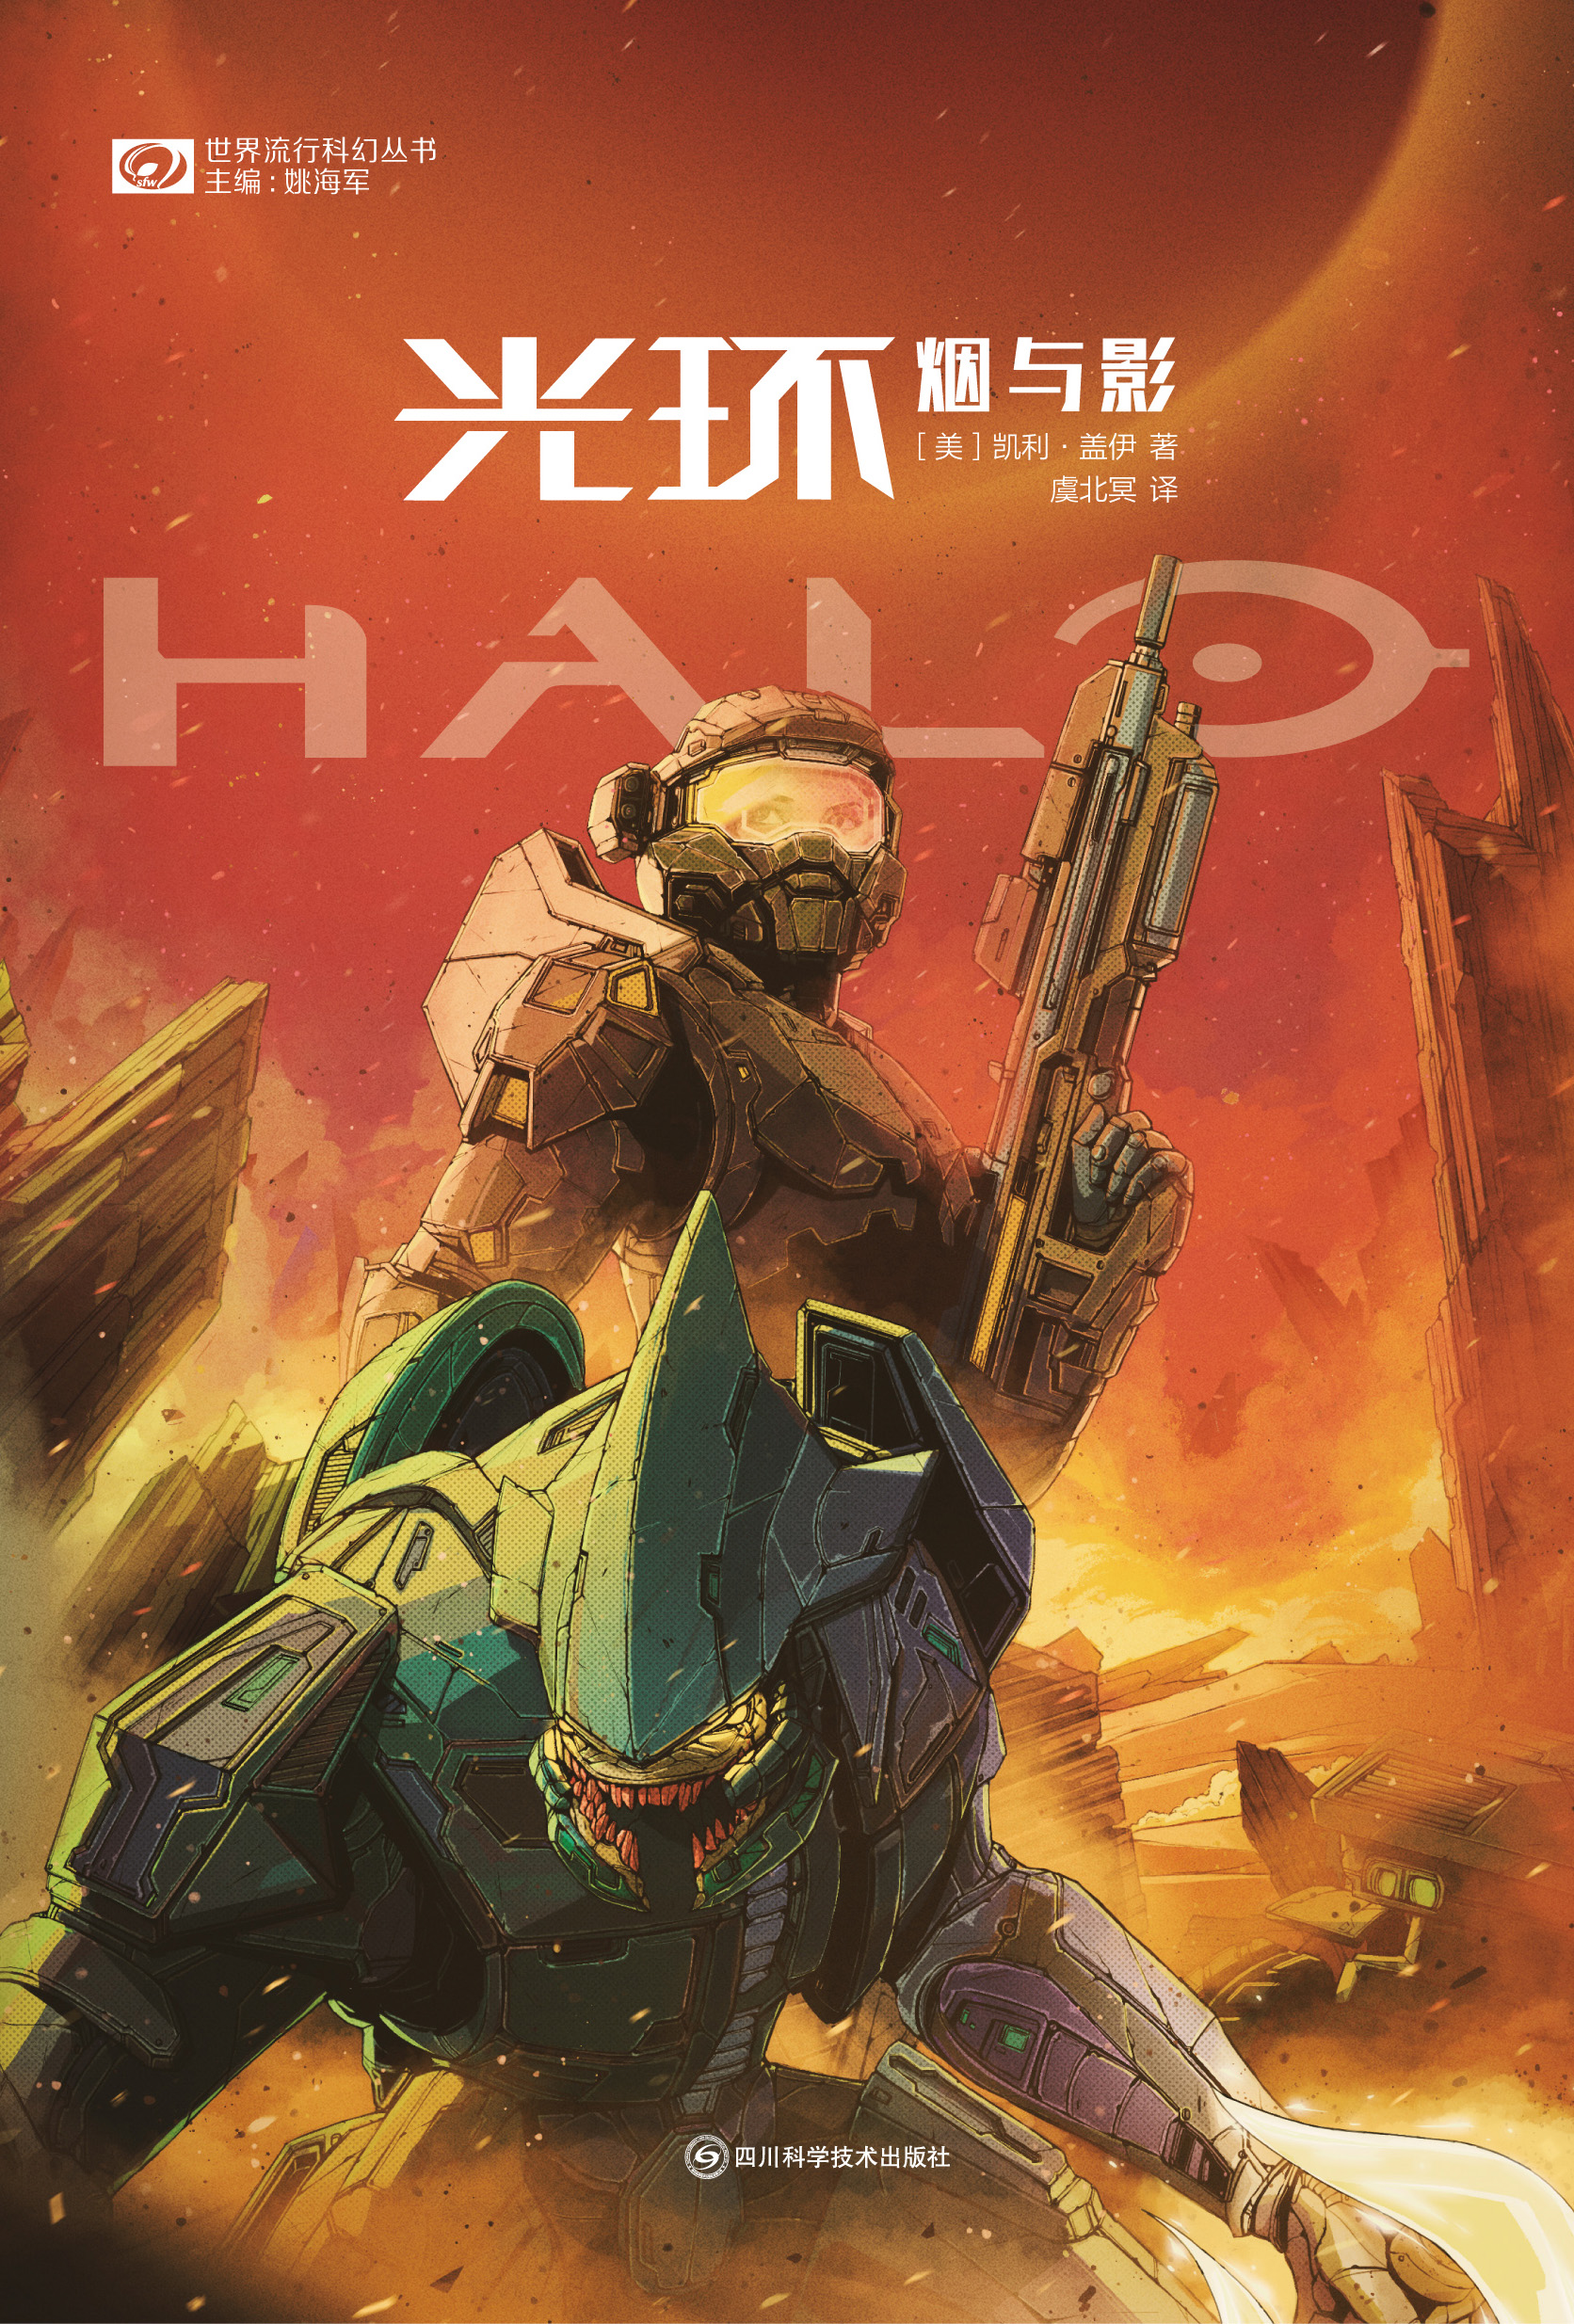 Chinese cover for Halo: Smoke and Shadow illustrated by 陈彦霏 Chen Yanfei